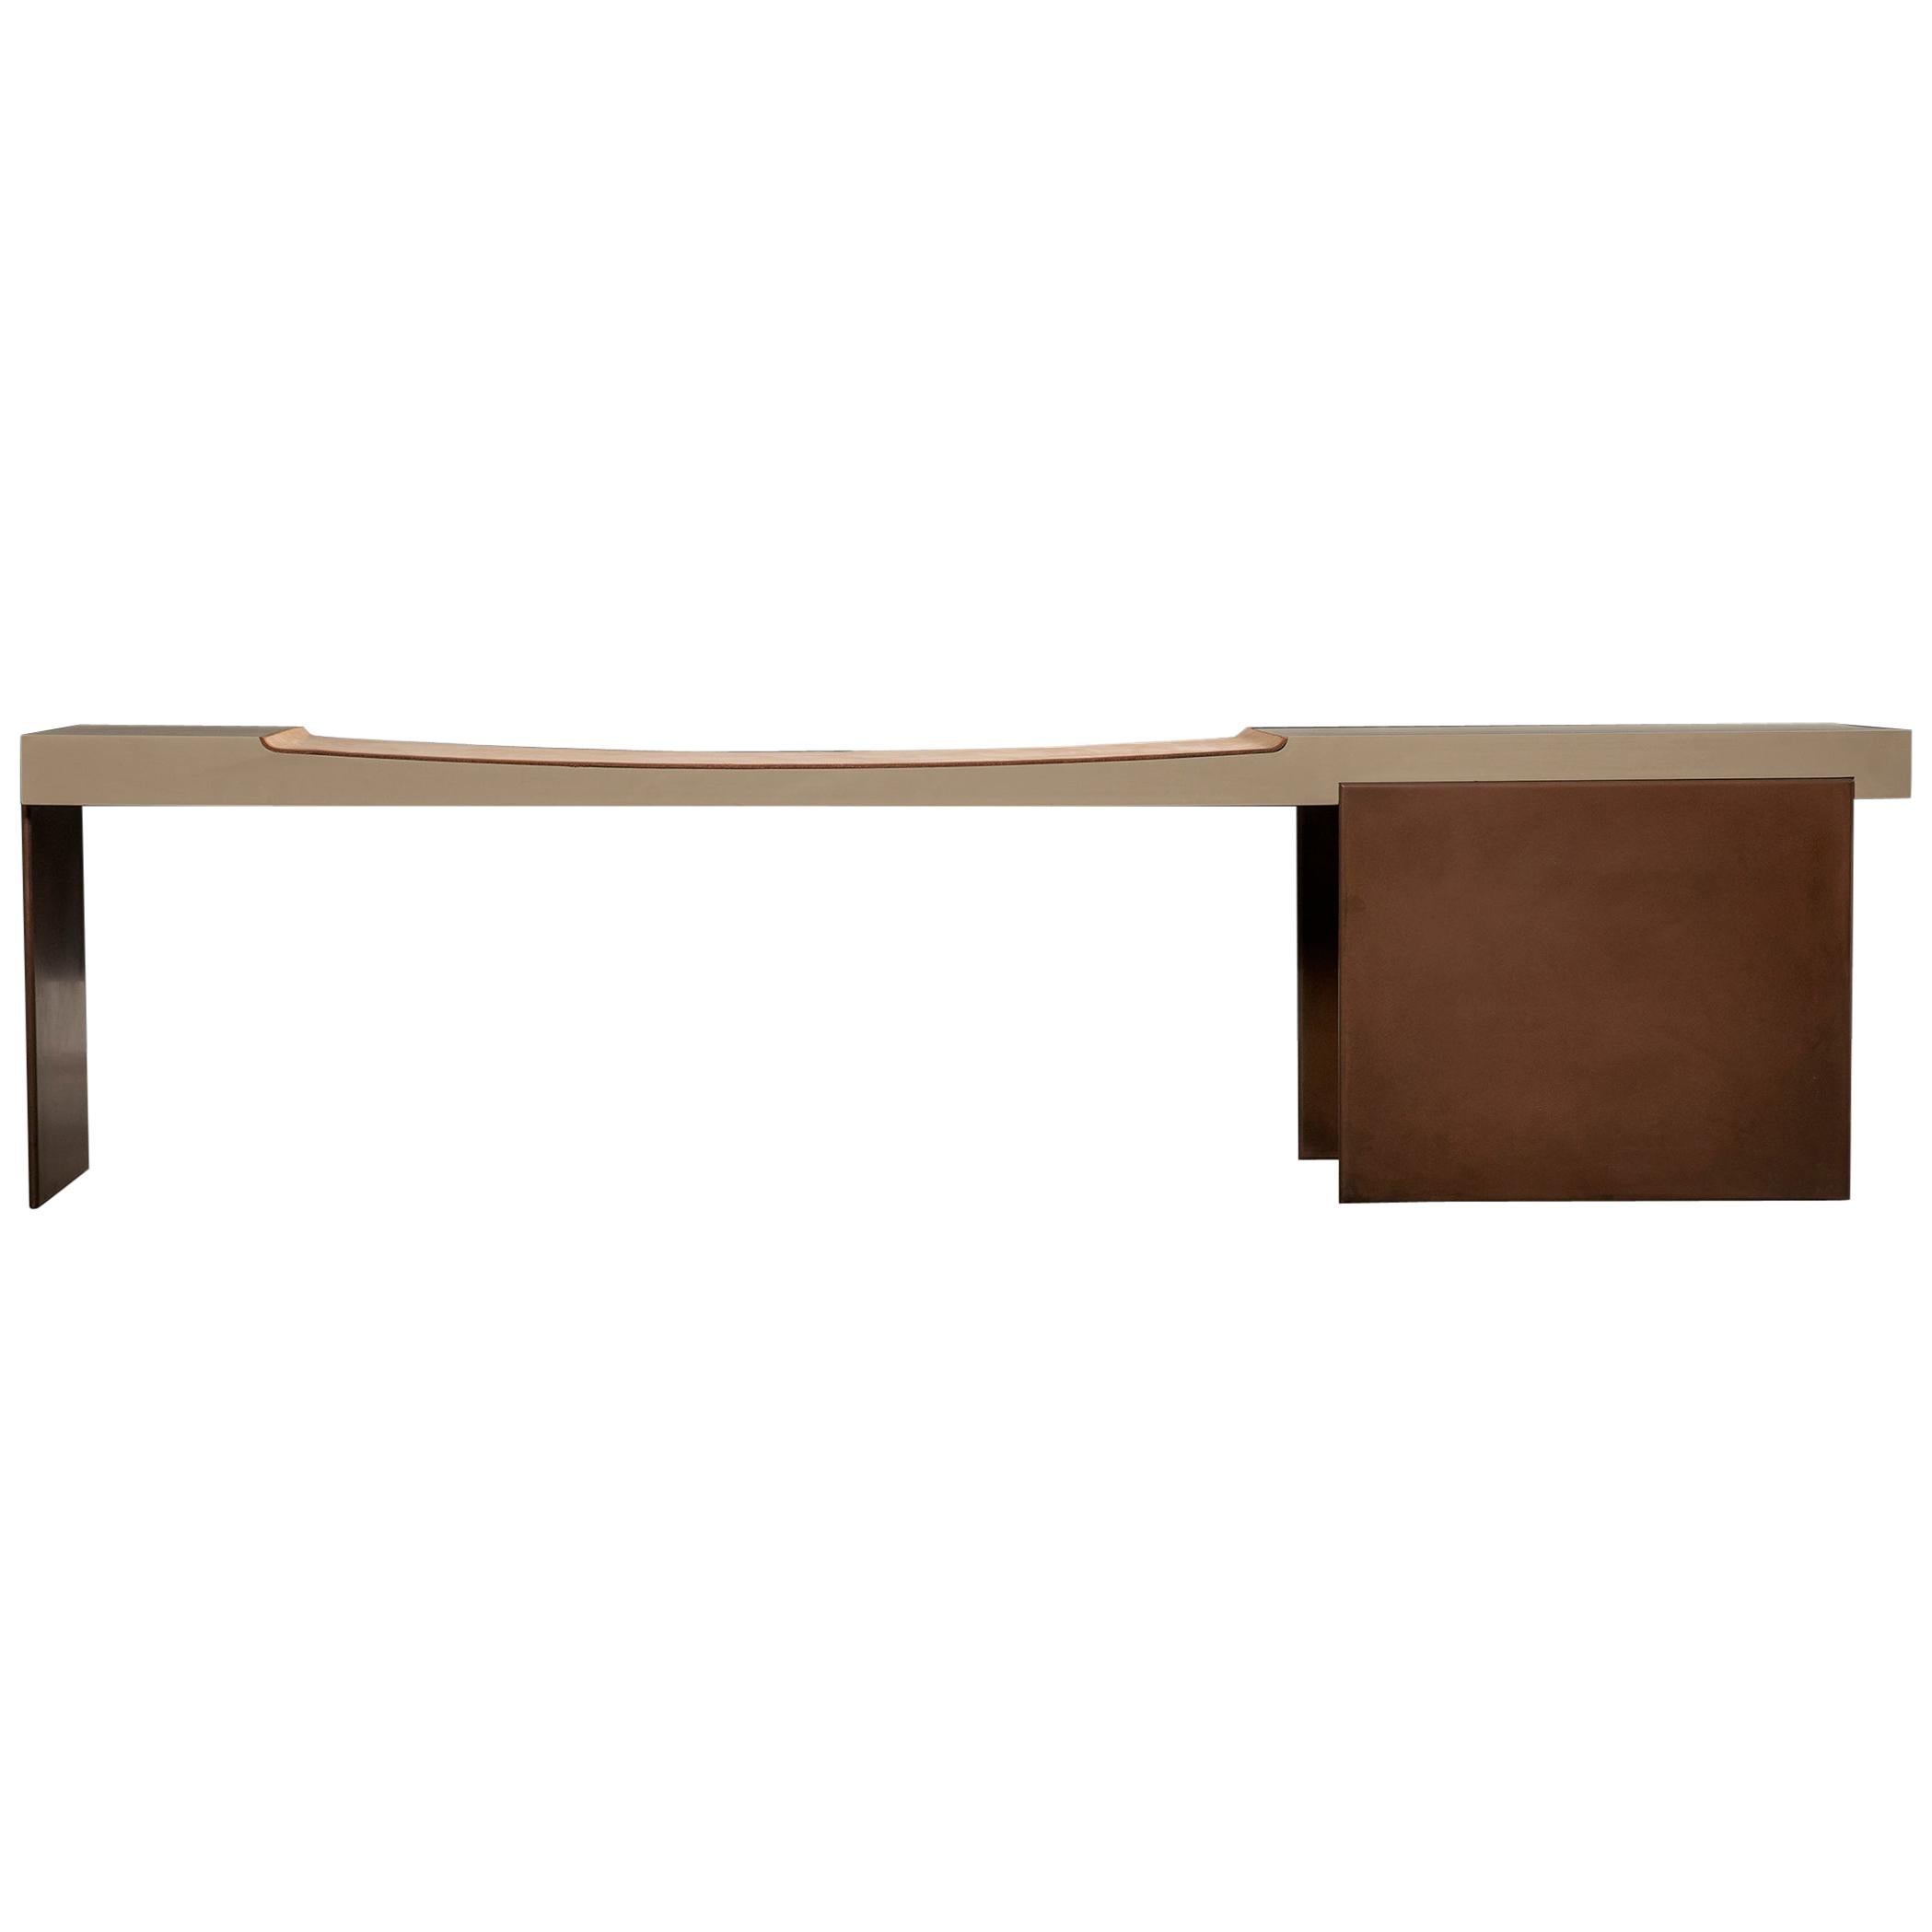 Museum Bench with Nubuck Suede Seating Bronze Finish Legs by Vivian Carbonell 